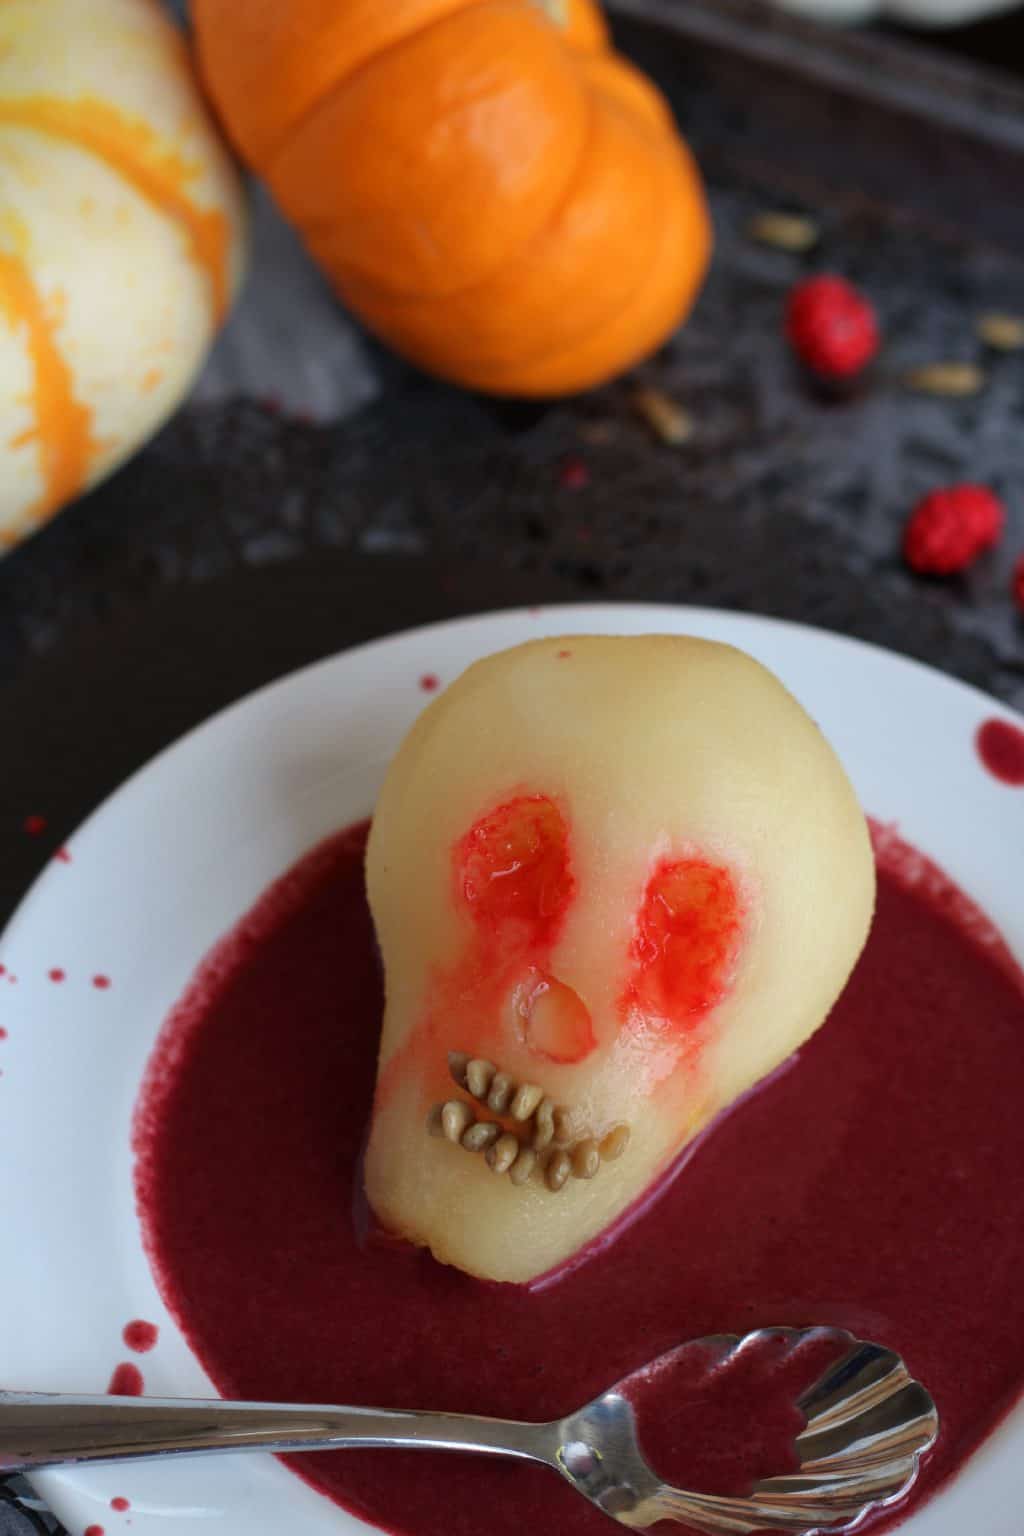 Poached pear for Halloween shaped like a skull in berry sauce